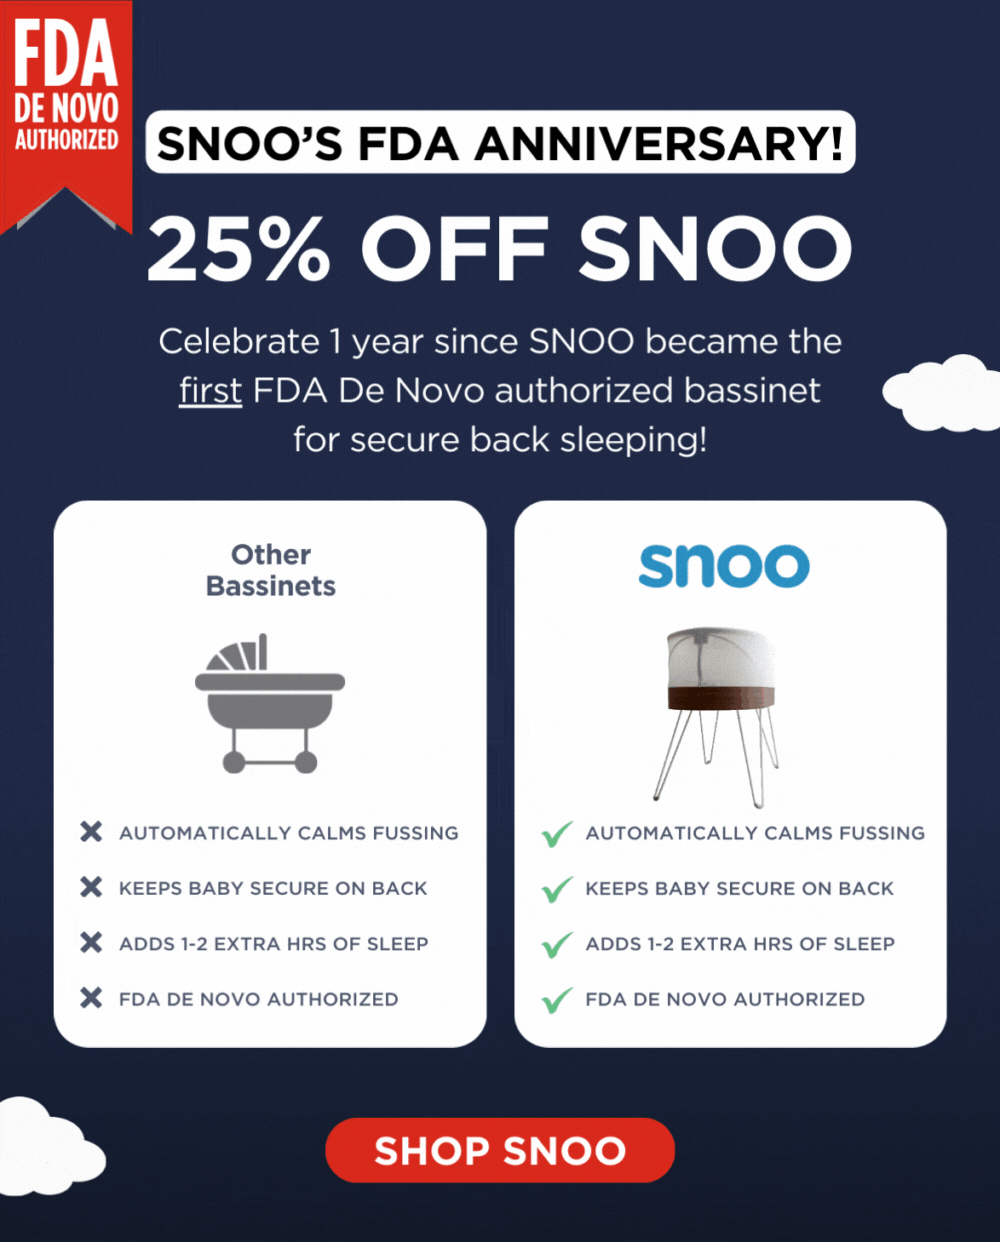 FDA DE NOVO AUTHORIZED. SNOO'S FDA ANNIVERSARY! 25% OFF SNOO. Celebrate 1 year since SNOO became the first FDA De Novo authorized bassinet for secure back sleeping! Automatically calms fussing, keeps Baby secure on back, adds 1-2 extra hrs of sleep, FDA De Novo authorized. SHOP SNOO